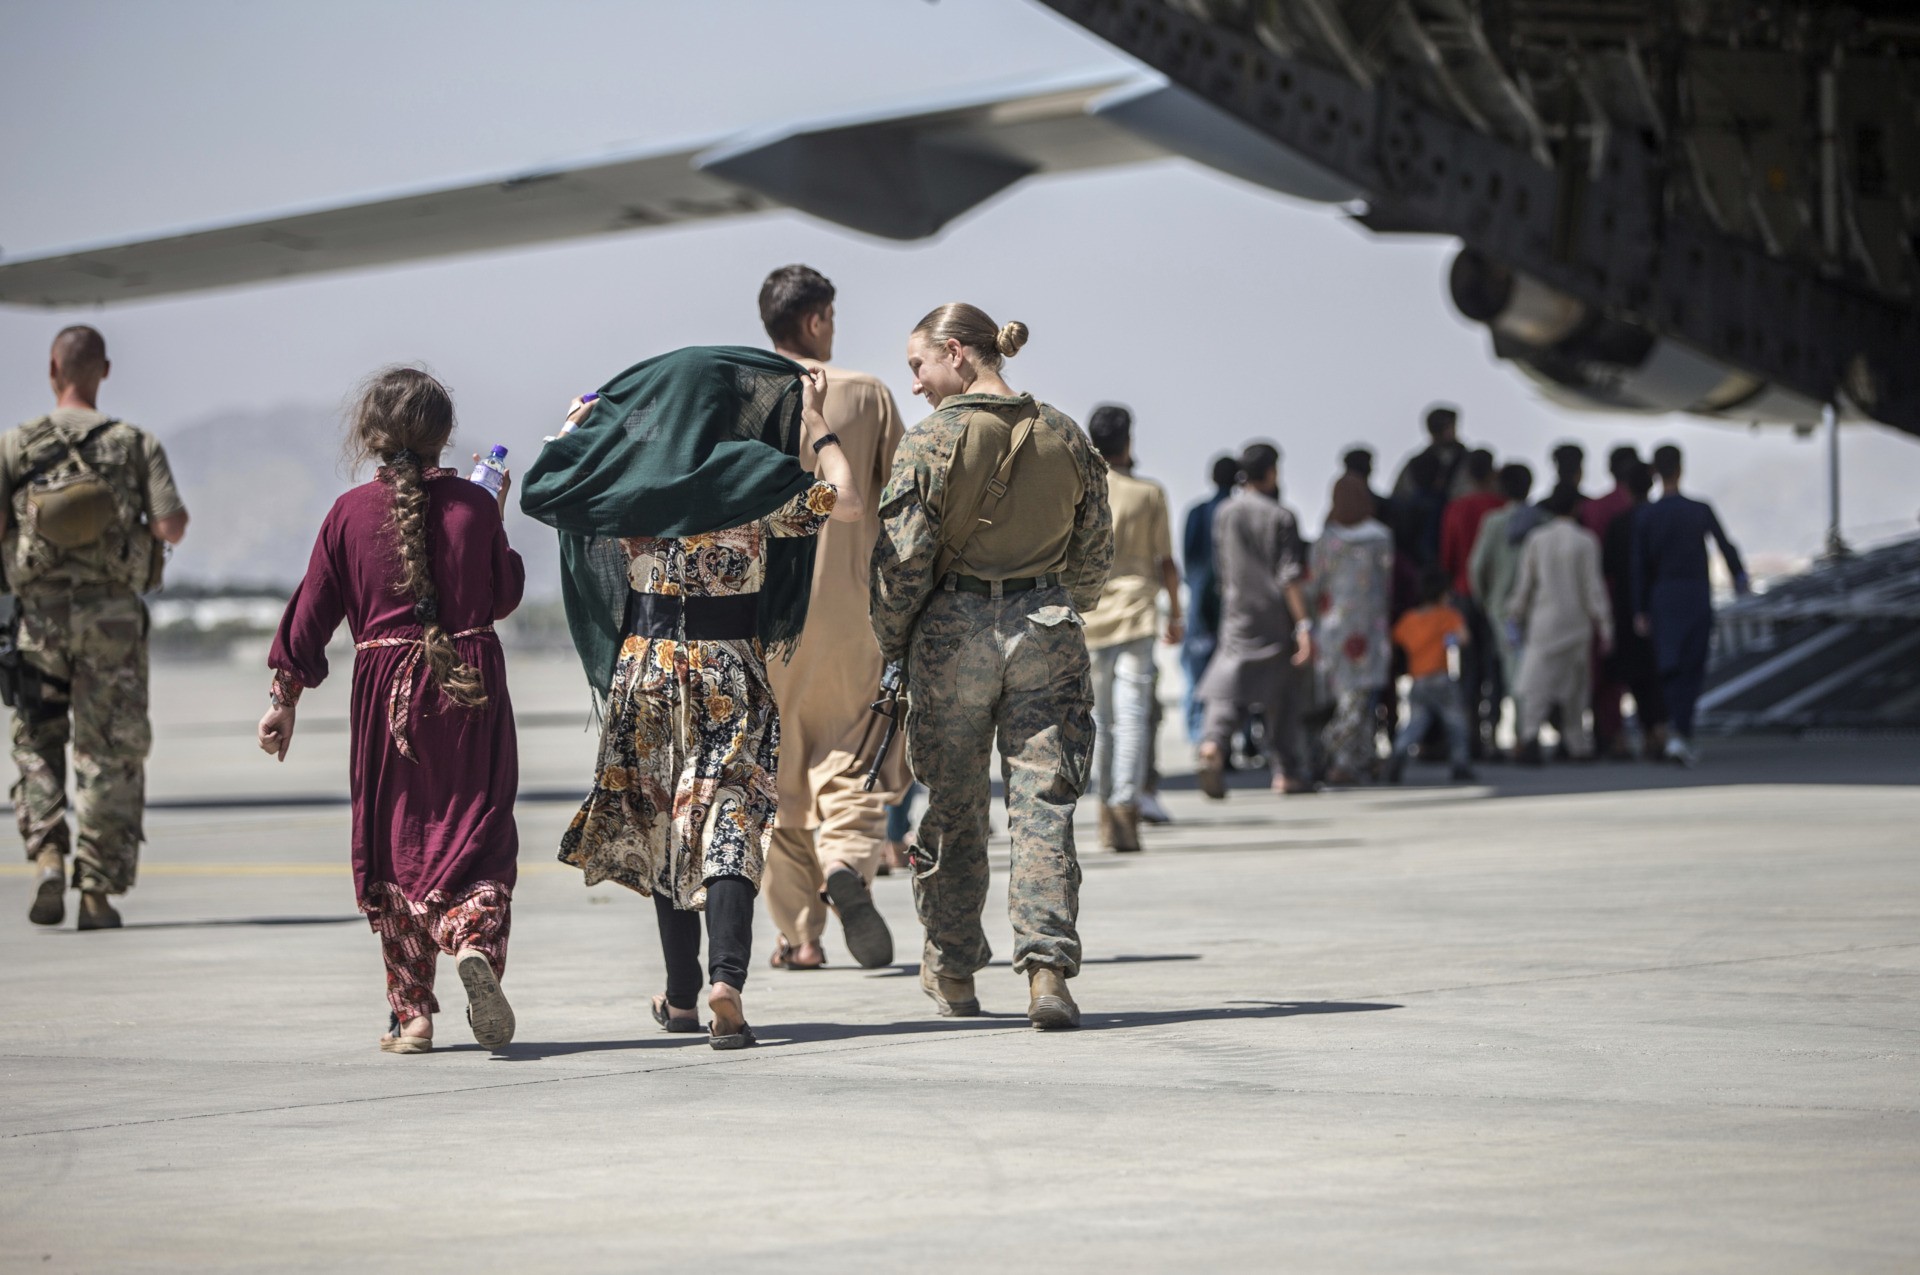 In this image provided by the U.S. Marine Corps, a Marine with the 24th Marine Expeditionary Unit walks with a family during ongoing evacuations at Hamid Karzai International Airport, Kabul, Afghanistan, Tuesday, Aug. 24, 2021. (Sgt. Samuel Ruiz/U.S. Marine Corps via AP)